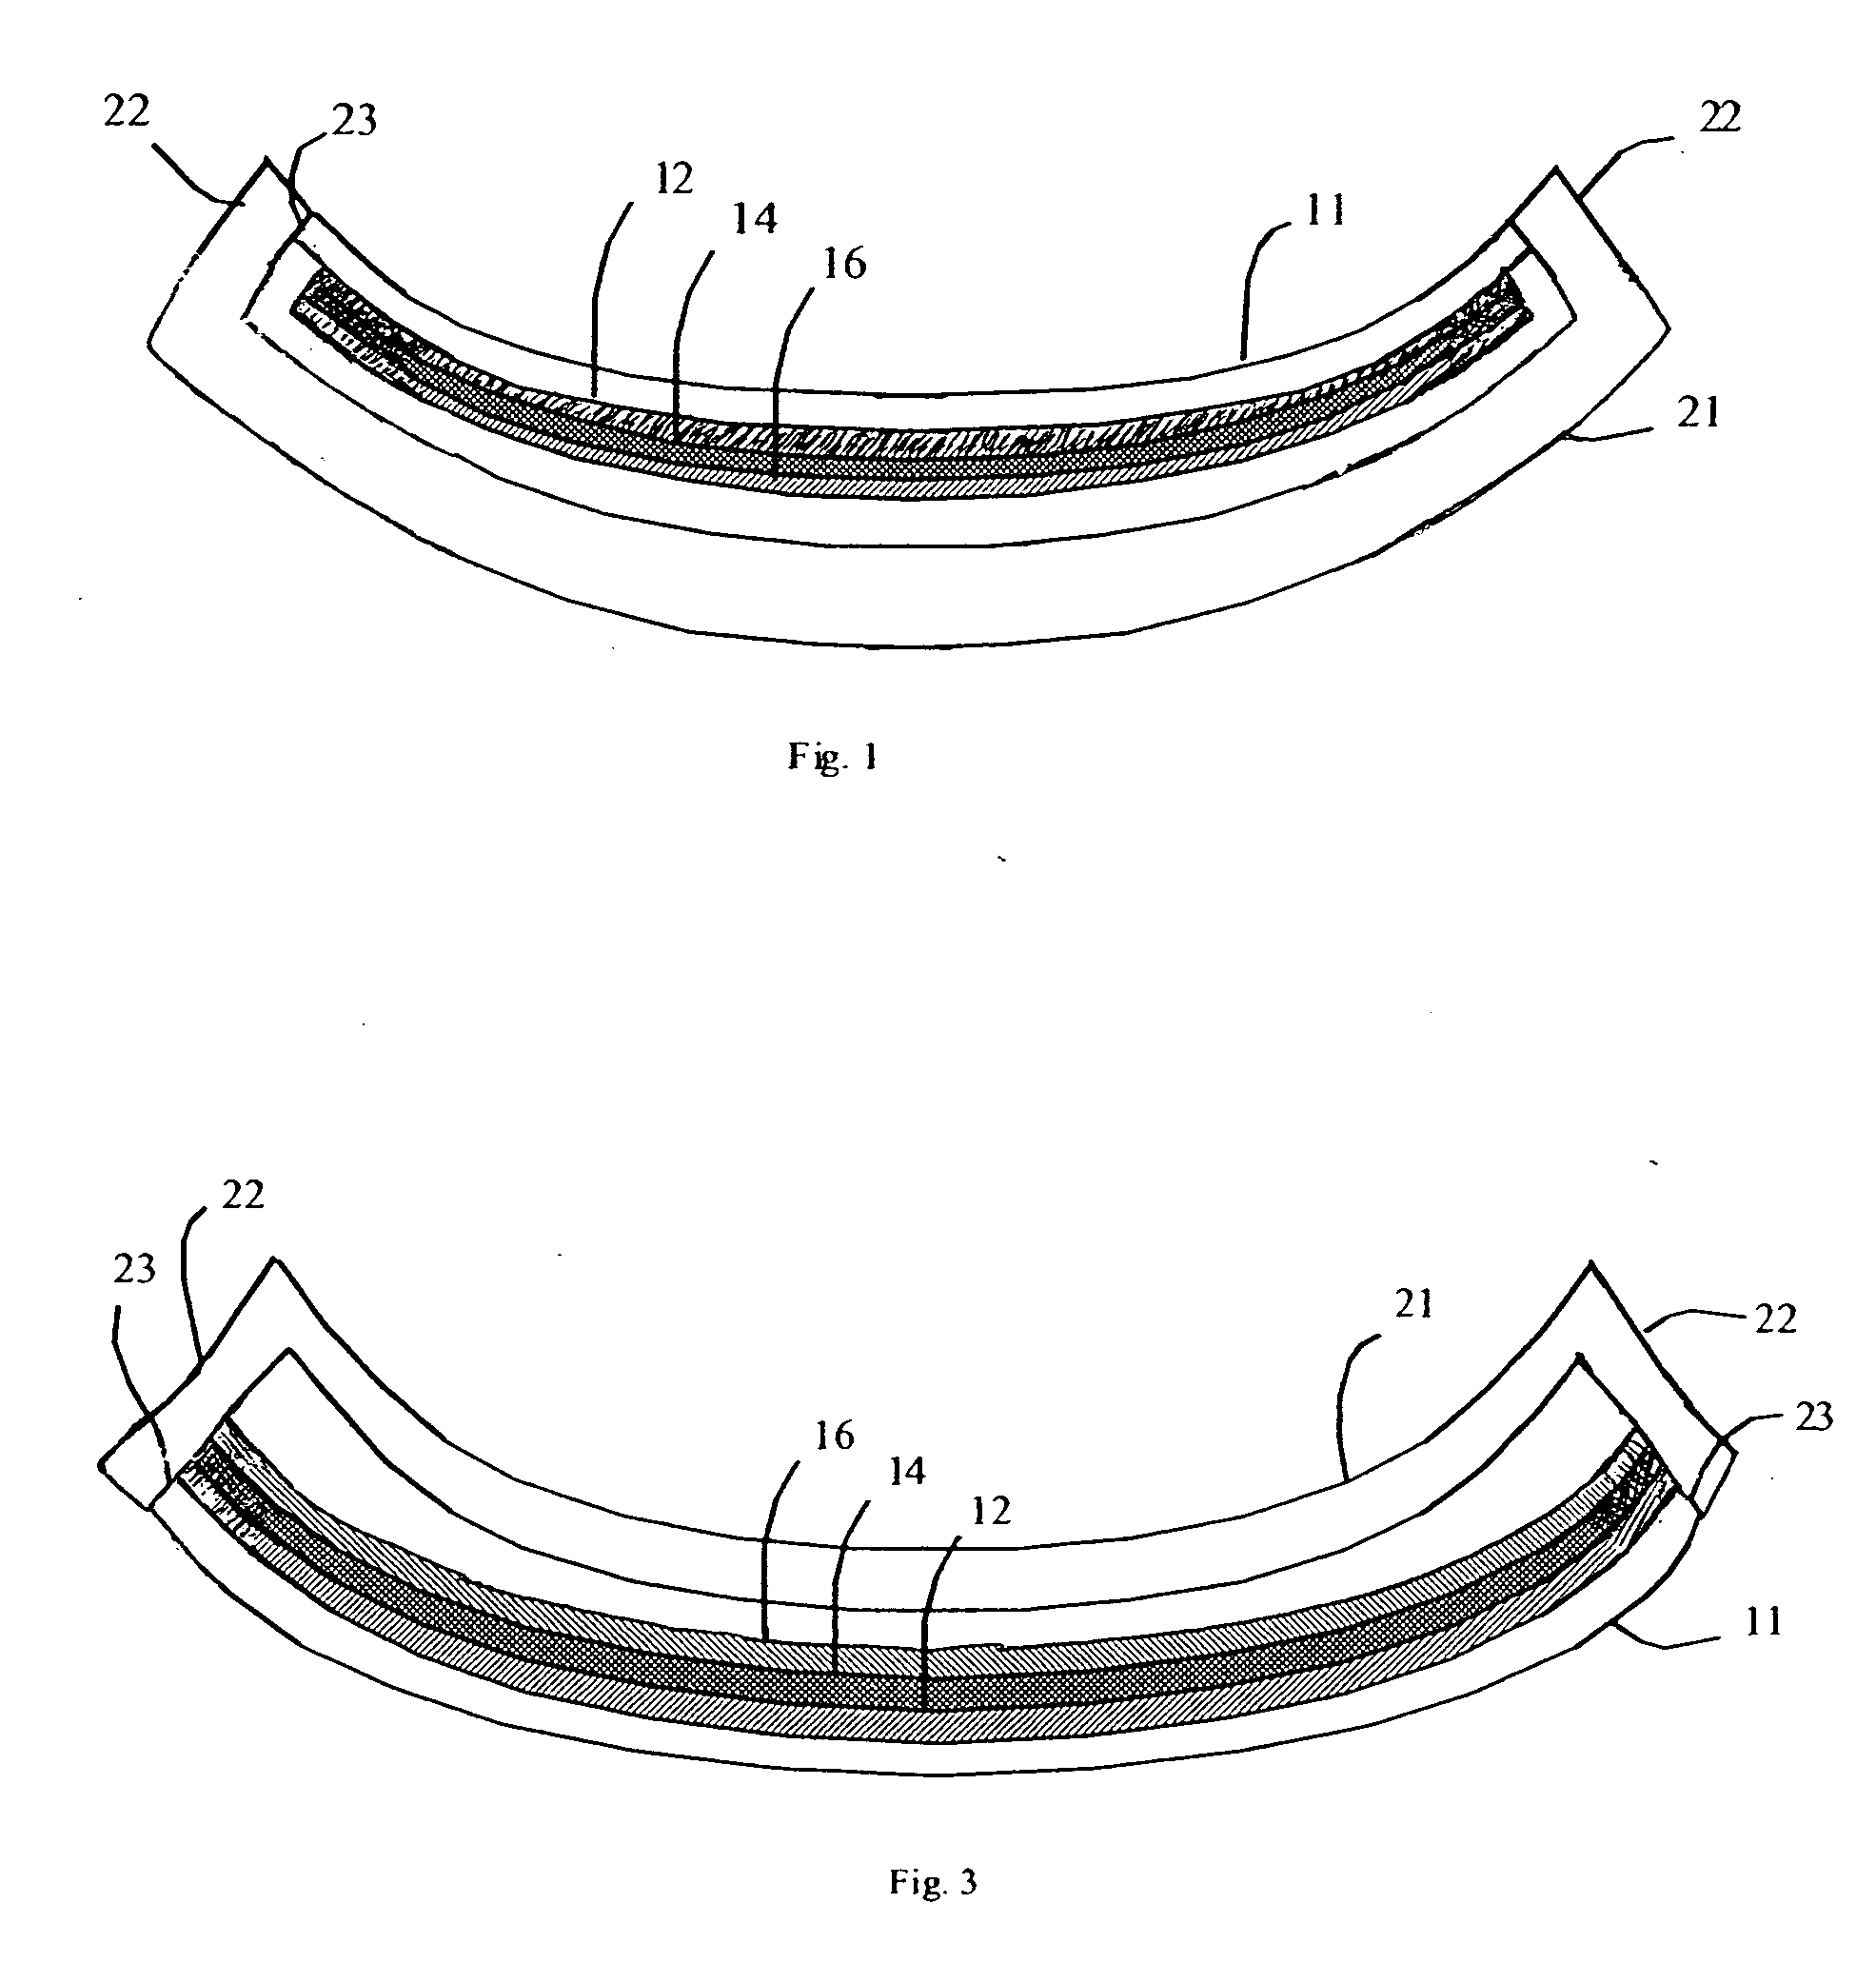 OLED device having curved viewing surface